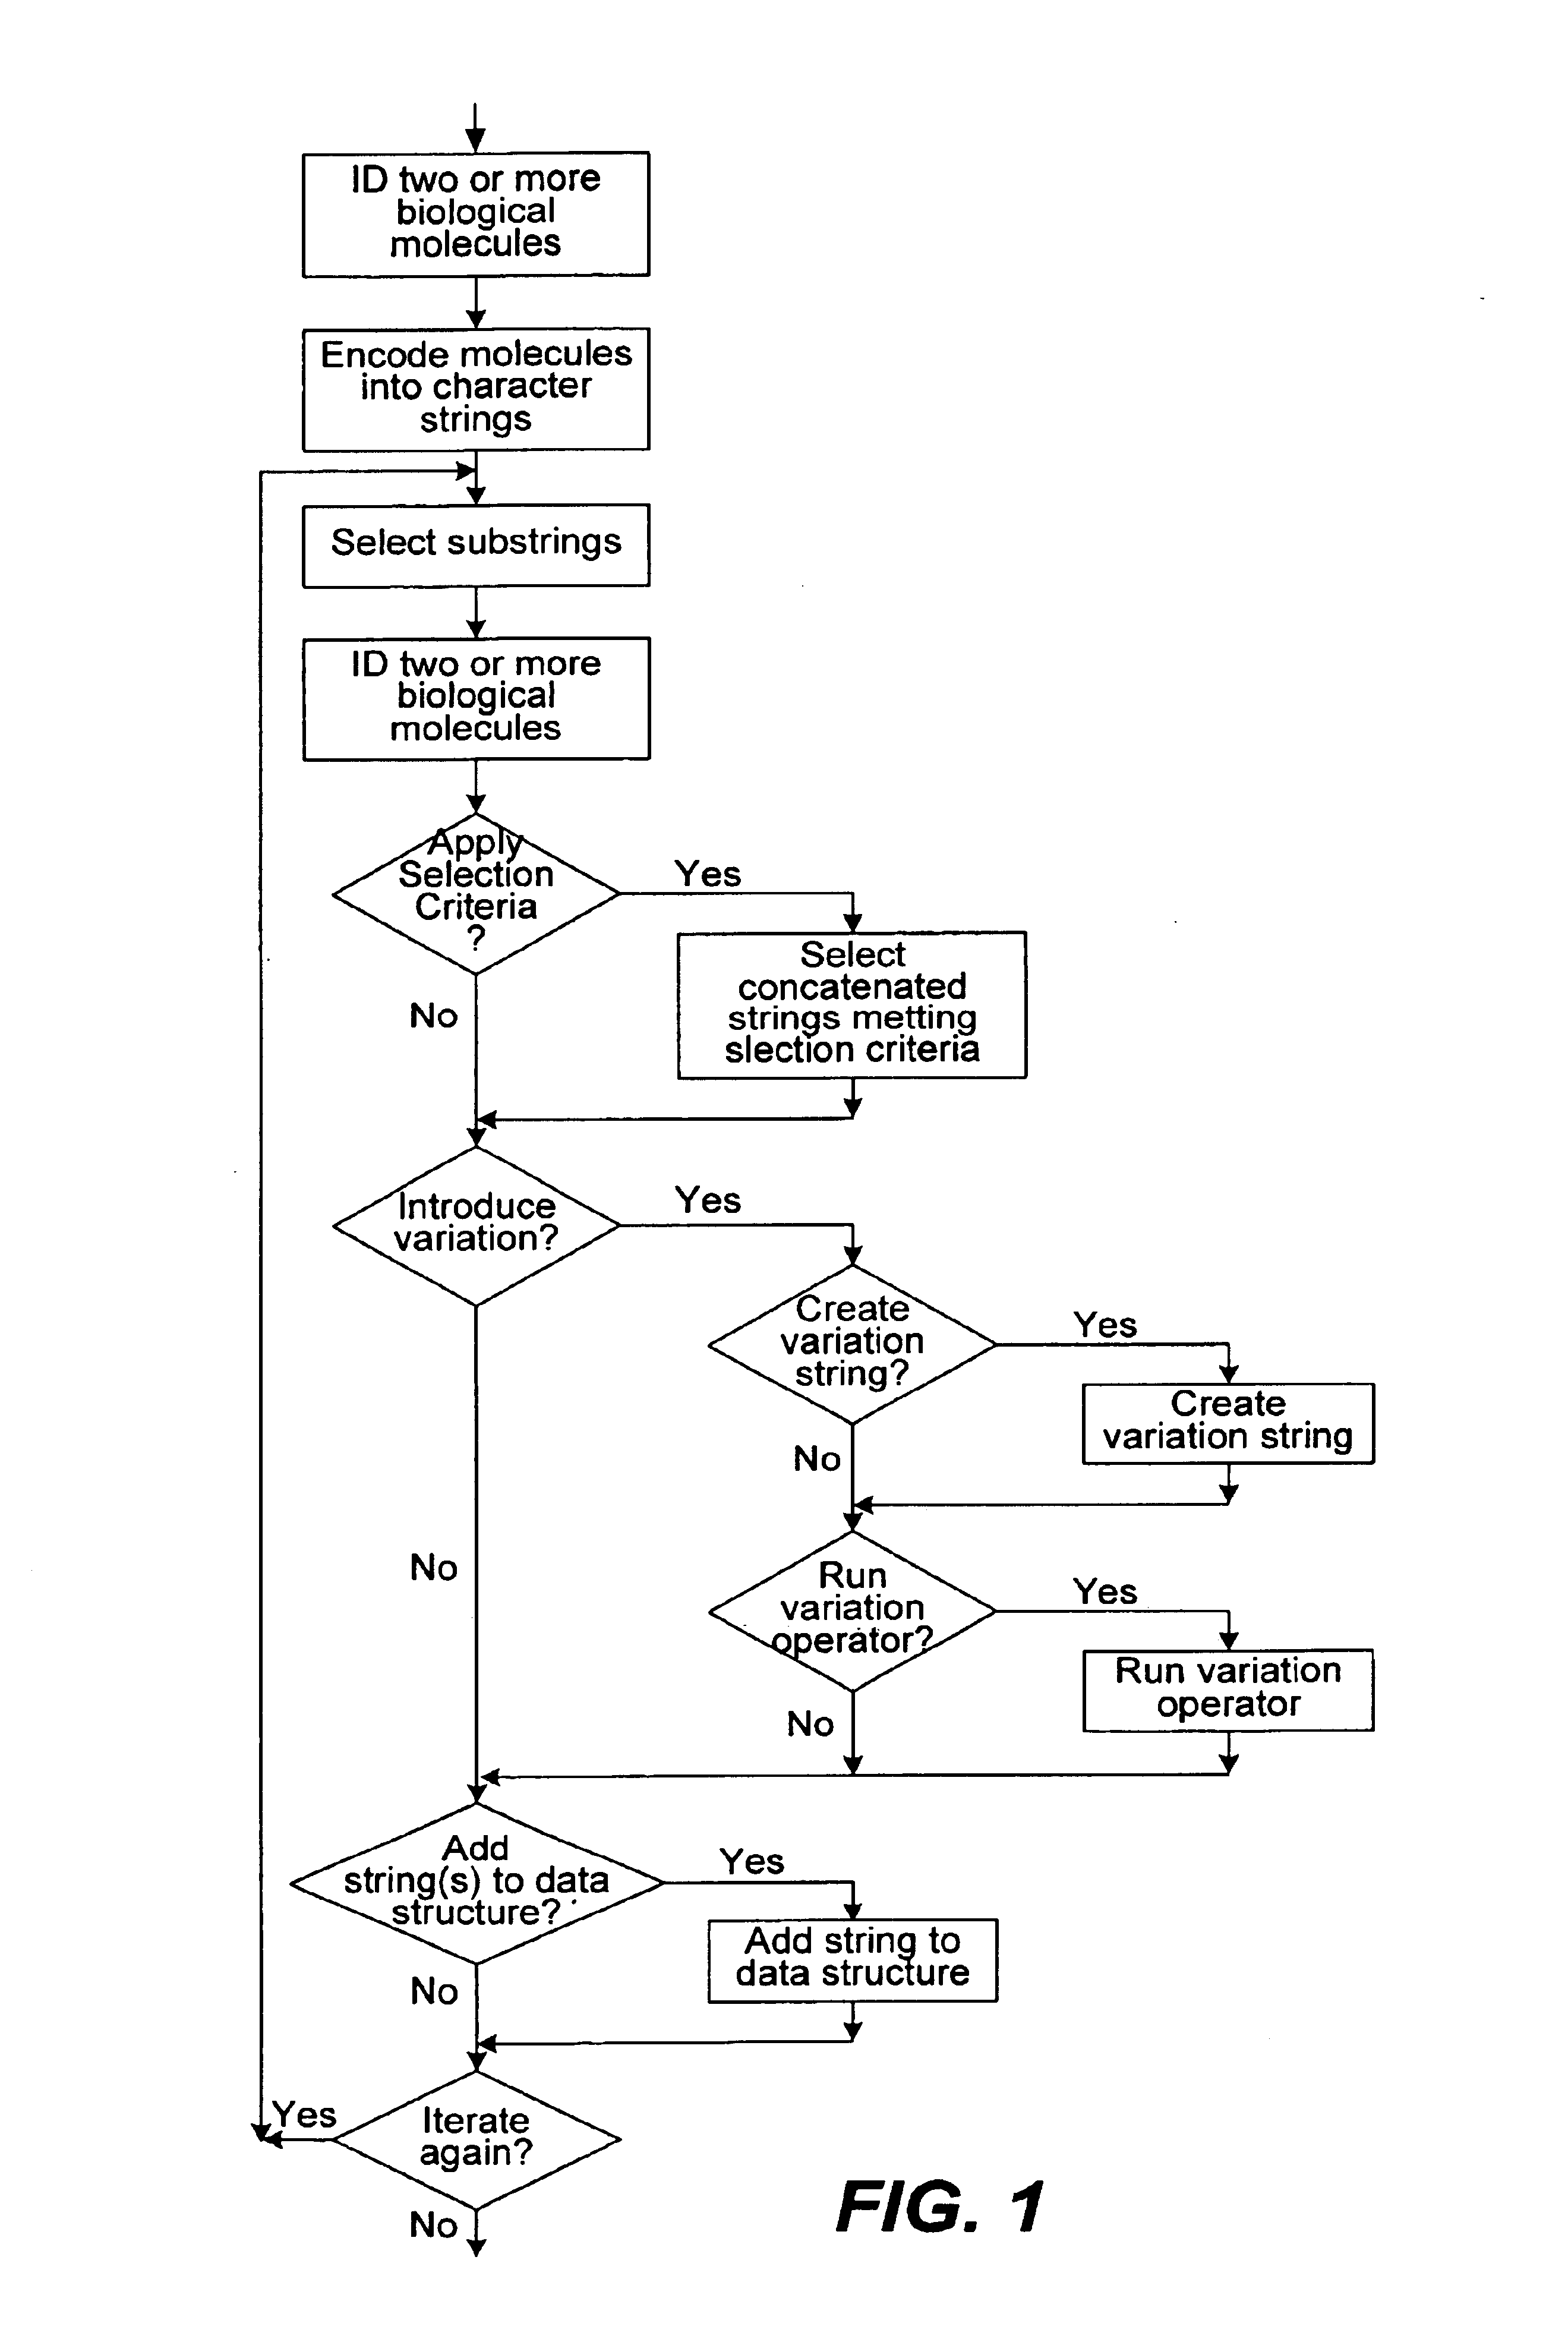 Methods of populating data structures for use in evolutionary simulations